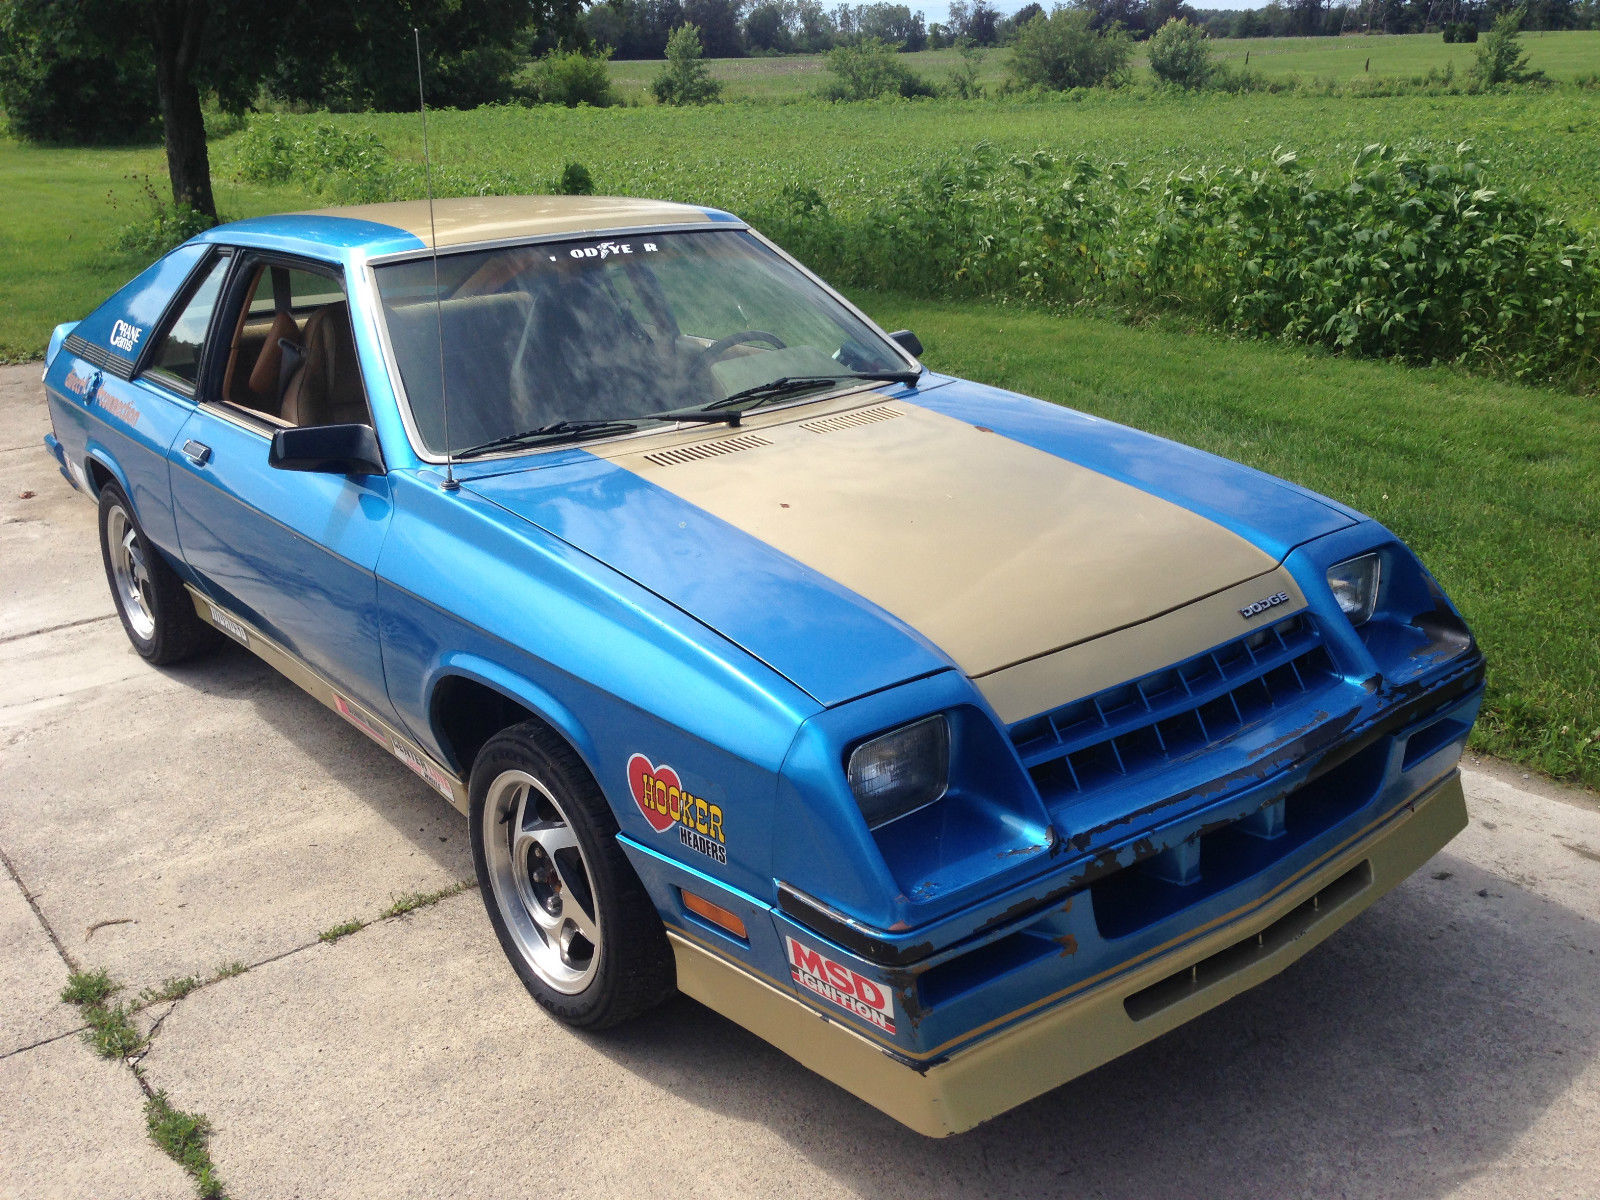 Is This 1982 Dodge Charger The ShelbyBacked Drag Racing